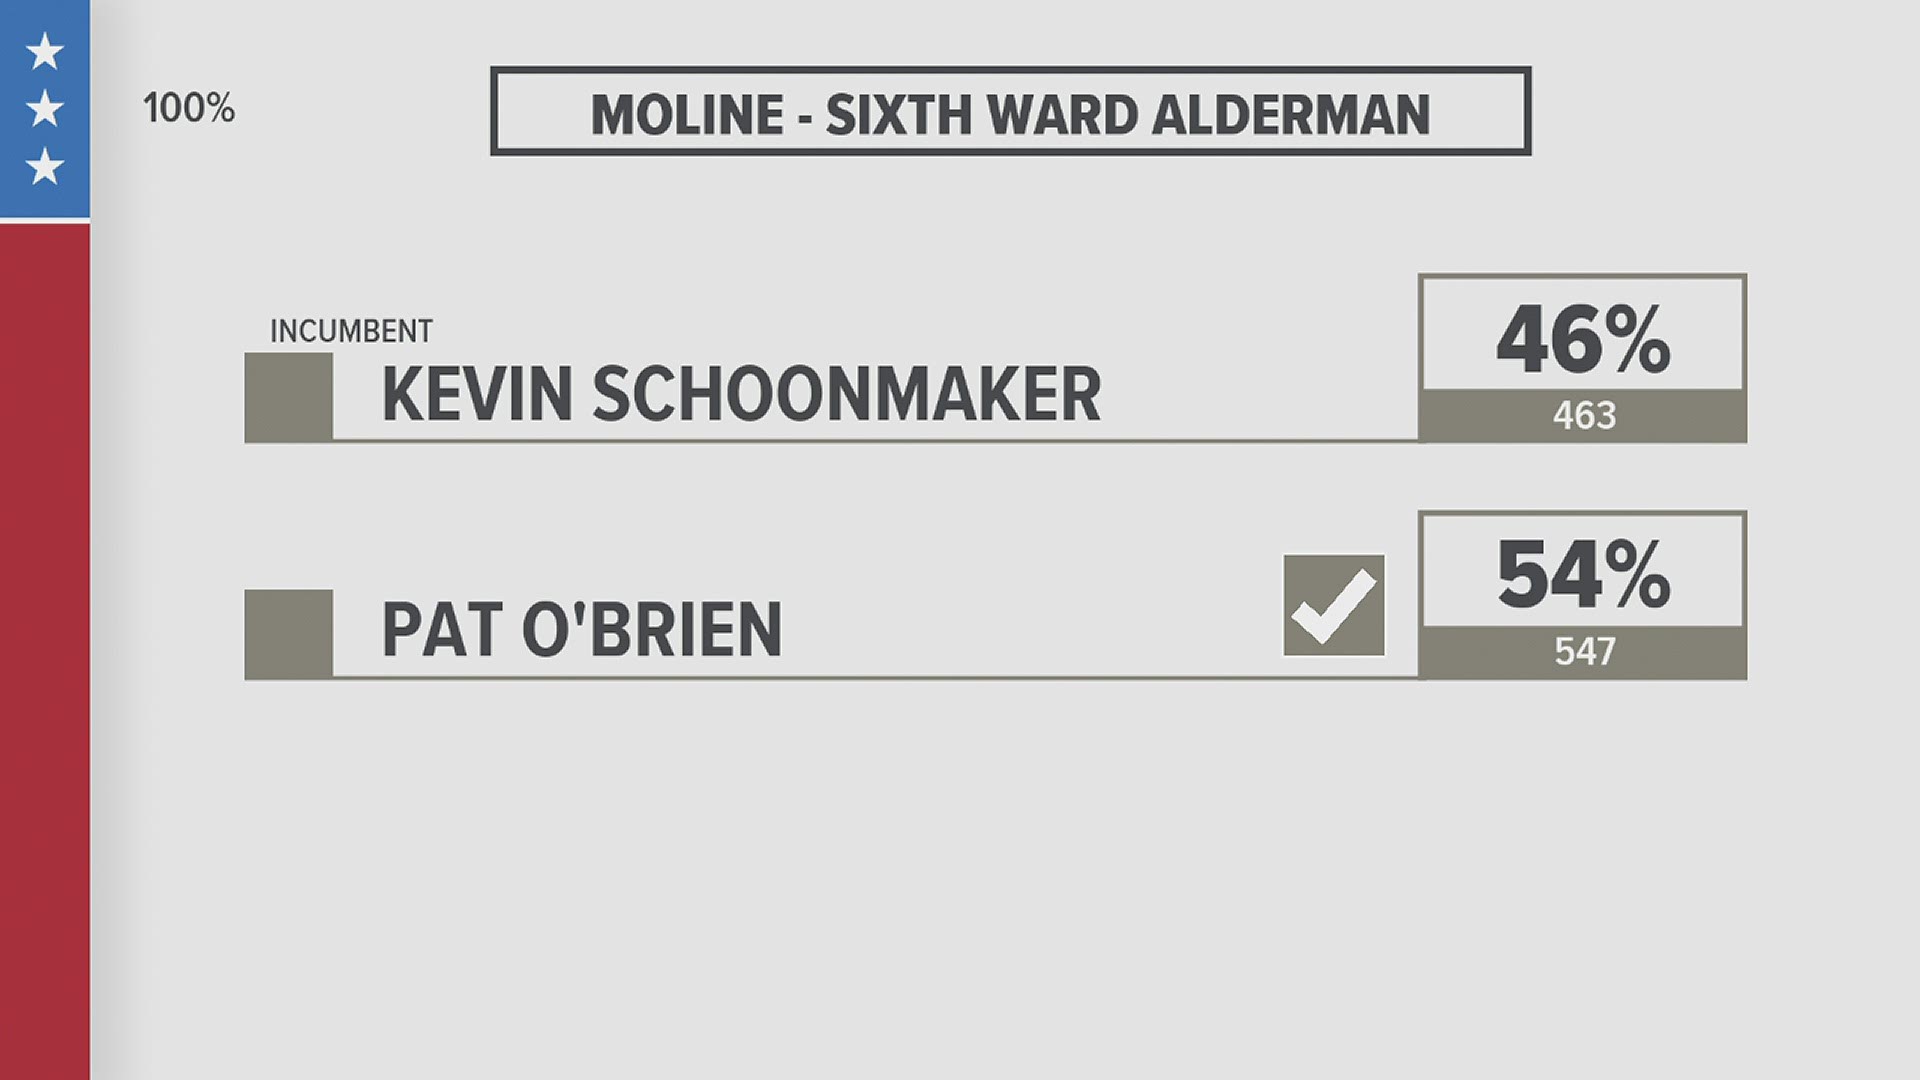 Three city council members were up for reelection in Moline. Moline voters went a different direction voting all three incumbents out of office.